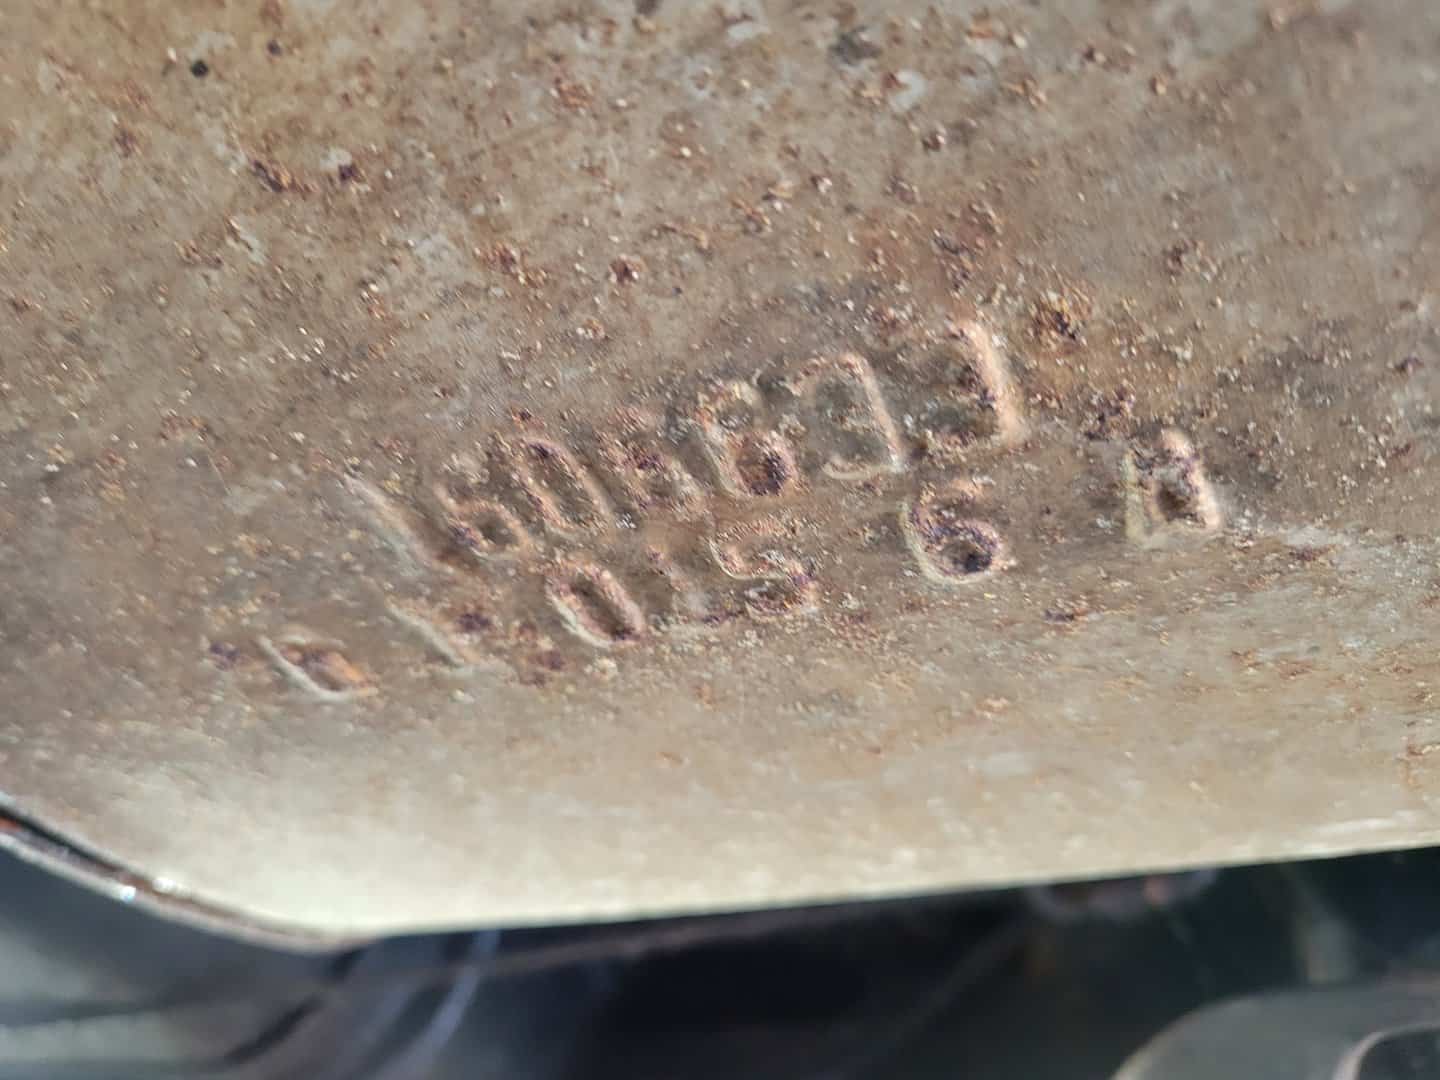 A Rusty Piece Of Metal With A Number On It From A 1976 Cadillac Coupe Deville.